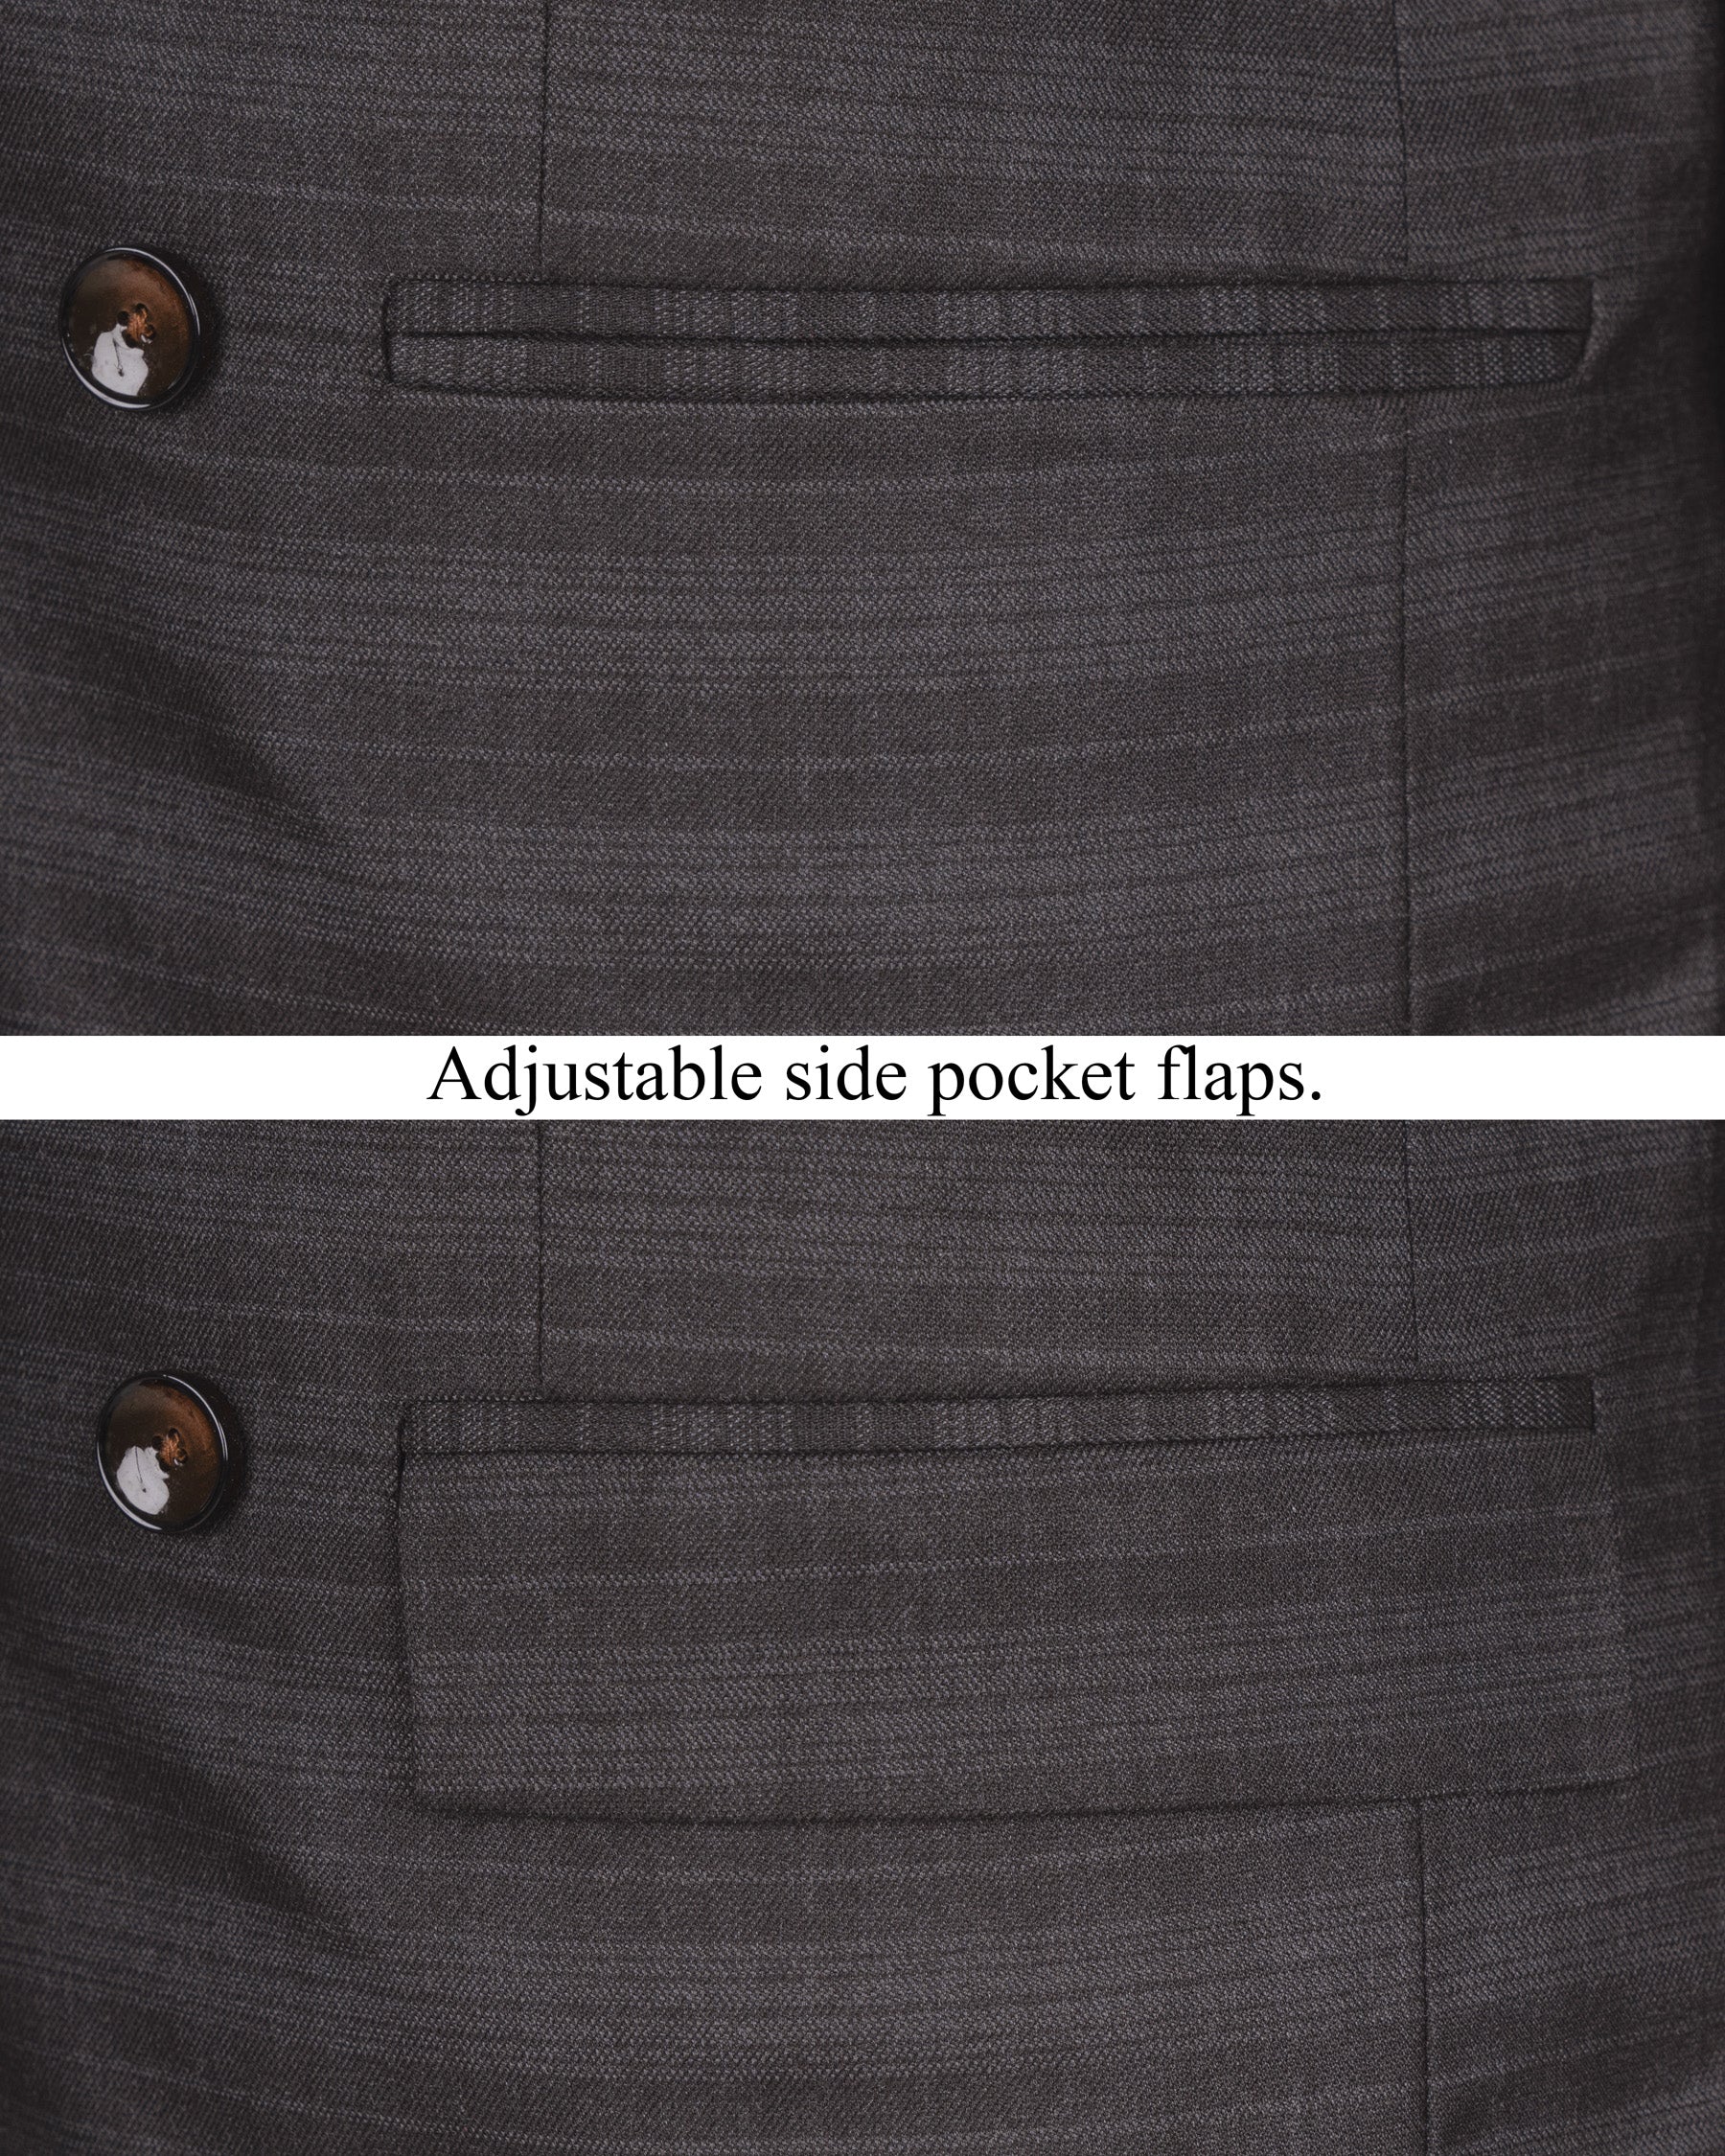 Grape Grey Double Breasted Striped Woolrich Suit ST1554-DB-36, ST1554-DB-38, ST1554-DB-40, ST1554-DB-42, ST1554-DB-44, ST1554-DB-46, ST1554-DB-48, ST1554-DB-50, ST1554-DB-52, ST1554-DB-54, ST1554-DB-56, ST1554-DB-58, ST1554-DB-60